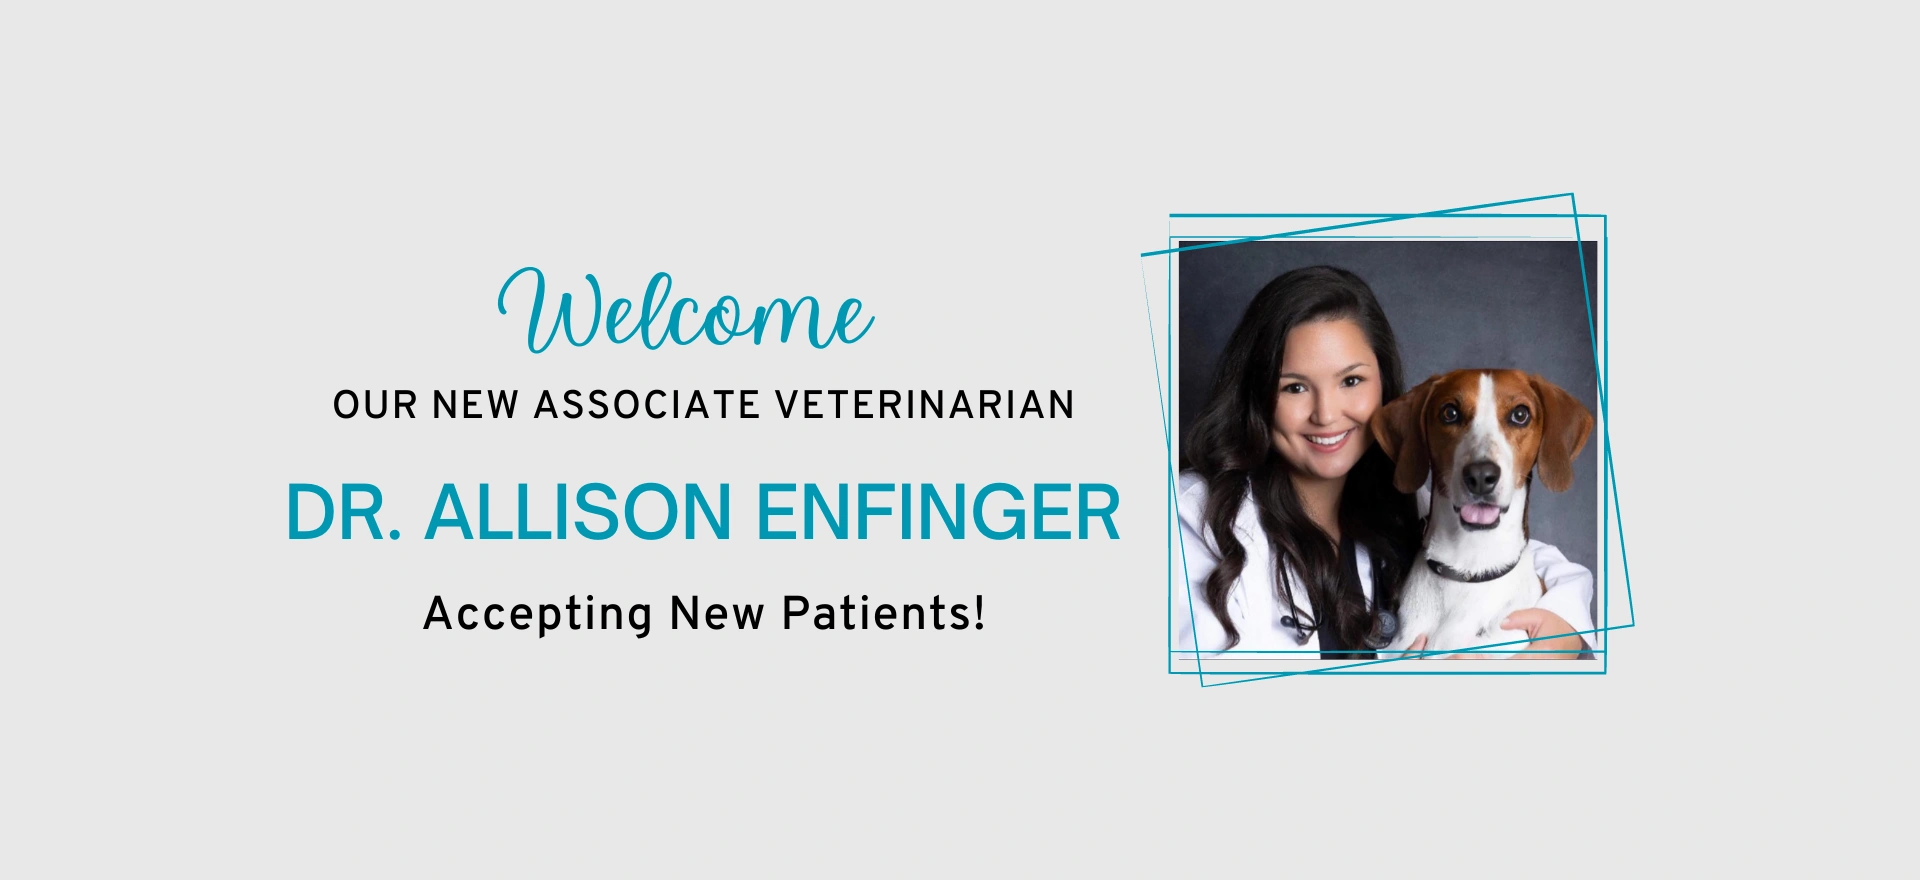 Welcome our new associate veterinarian Dr. Allison Enfinger. Accepting new patients!